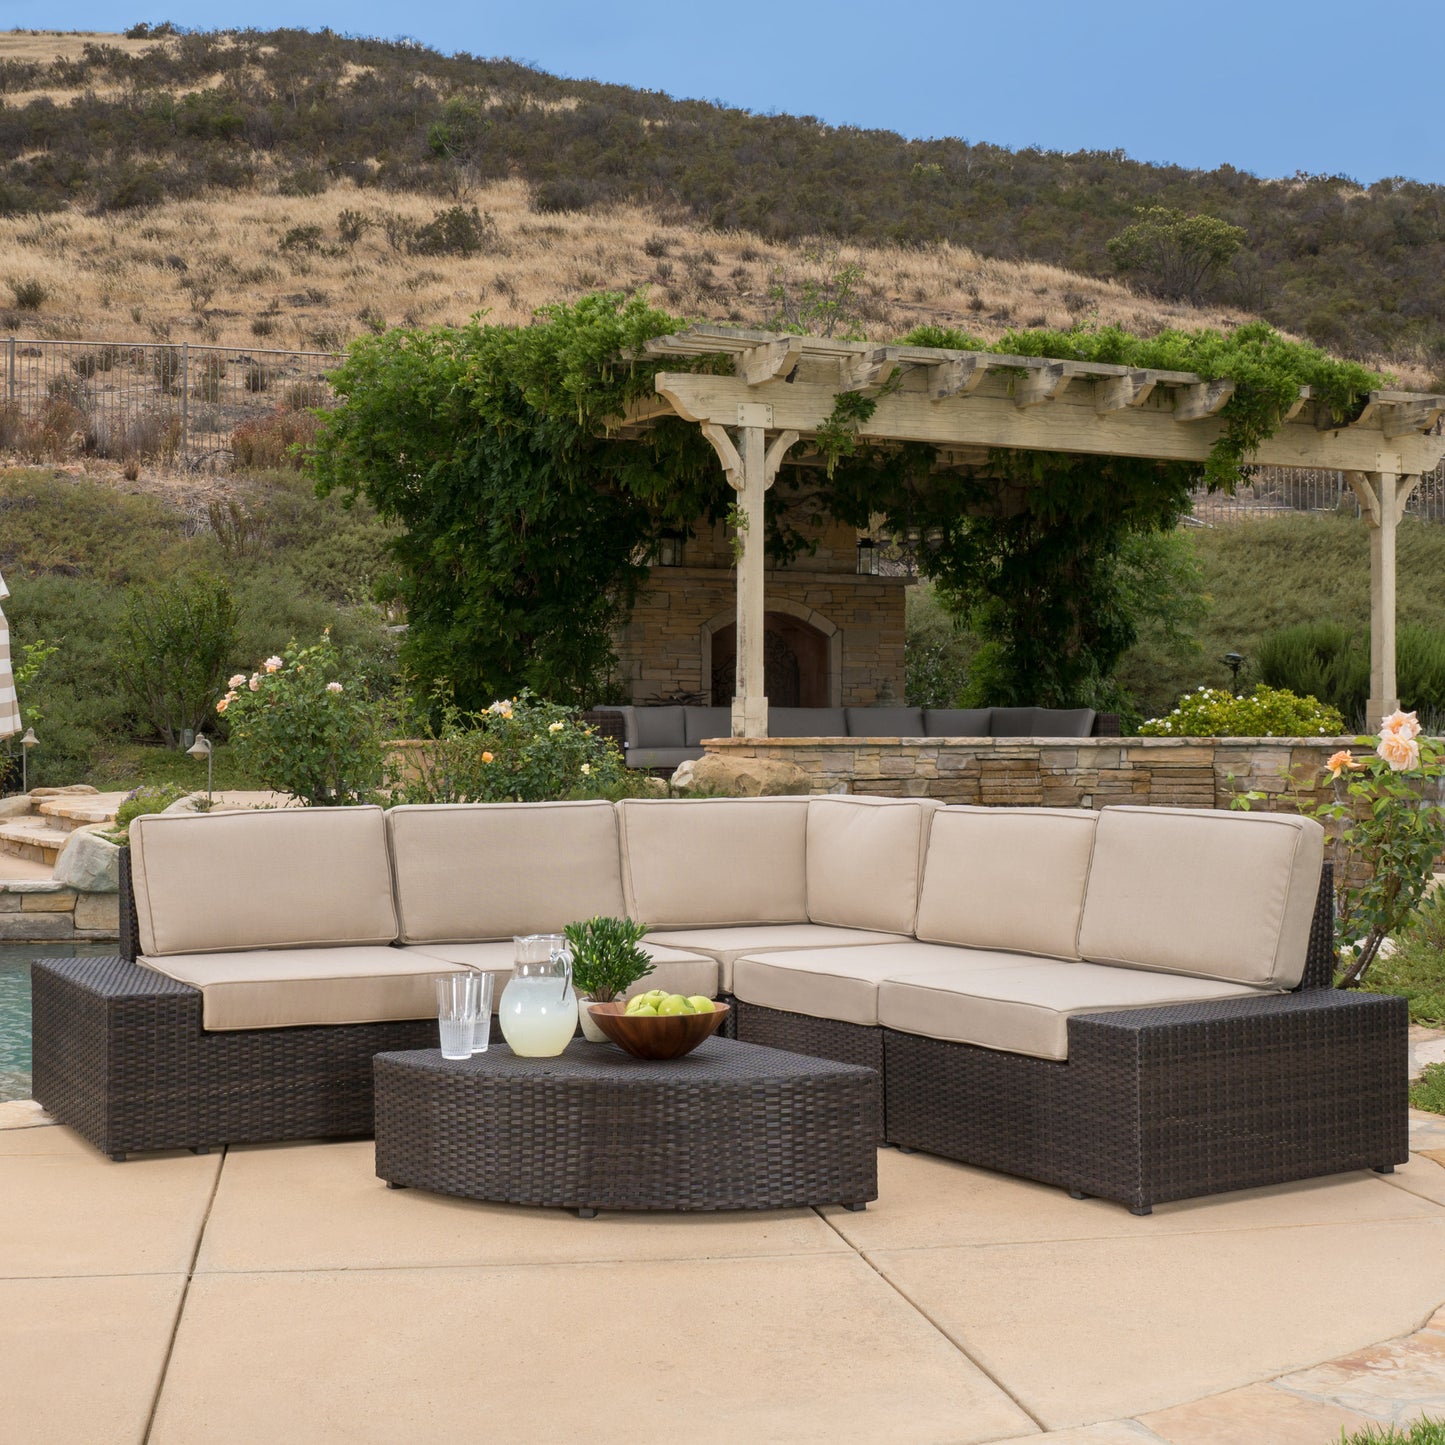 Reddington 6pc Outdoor Brown Wicker Sectional Seating Set